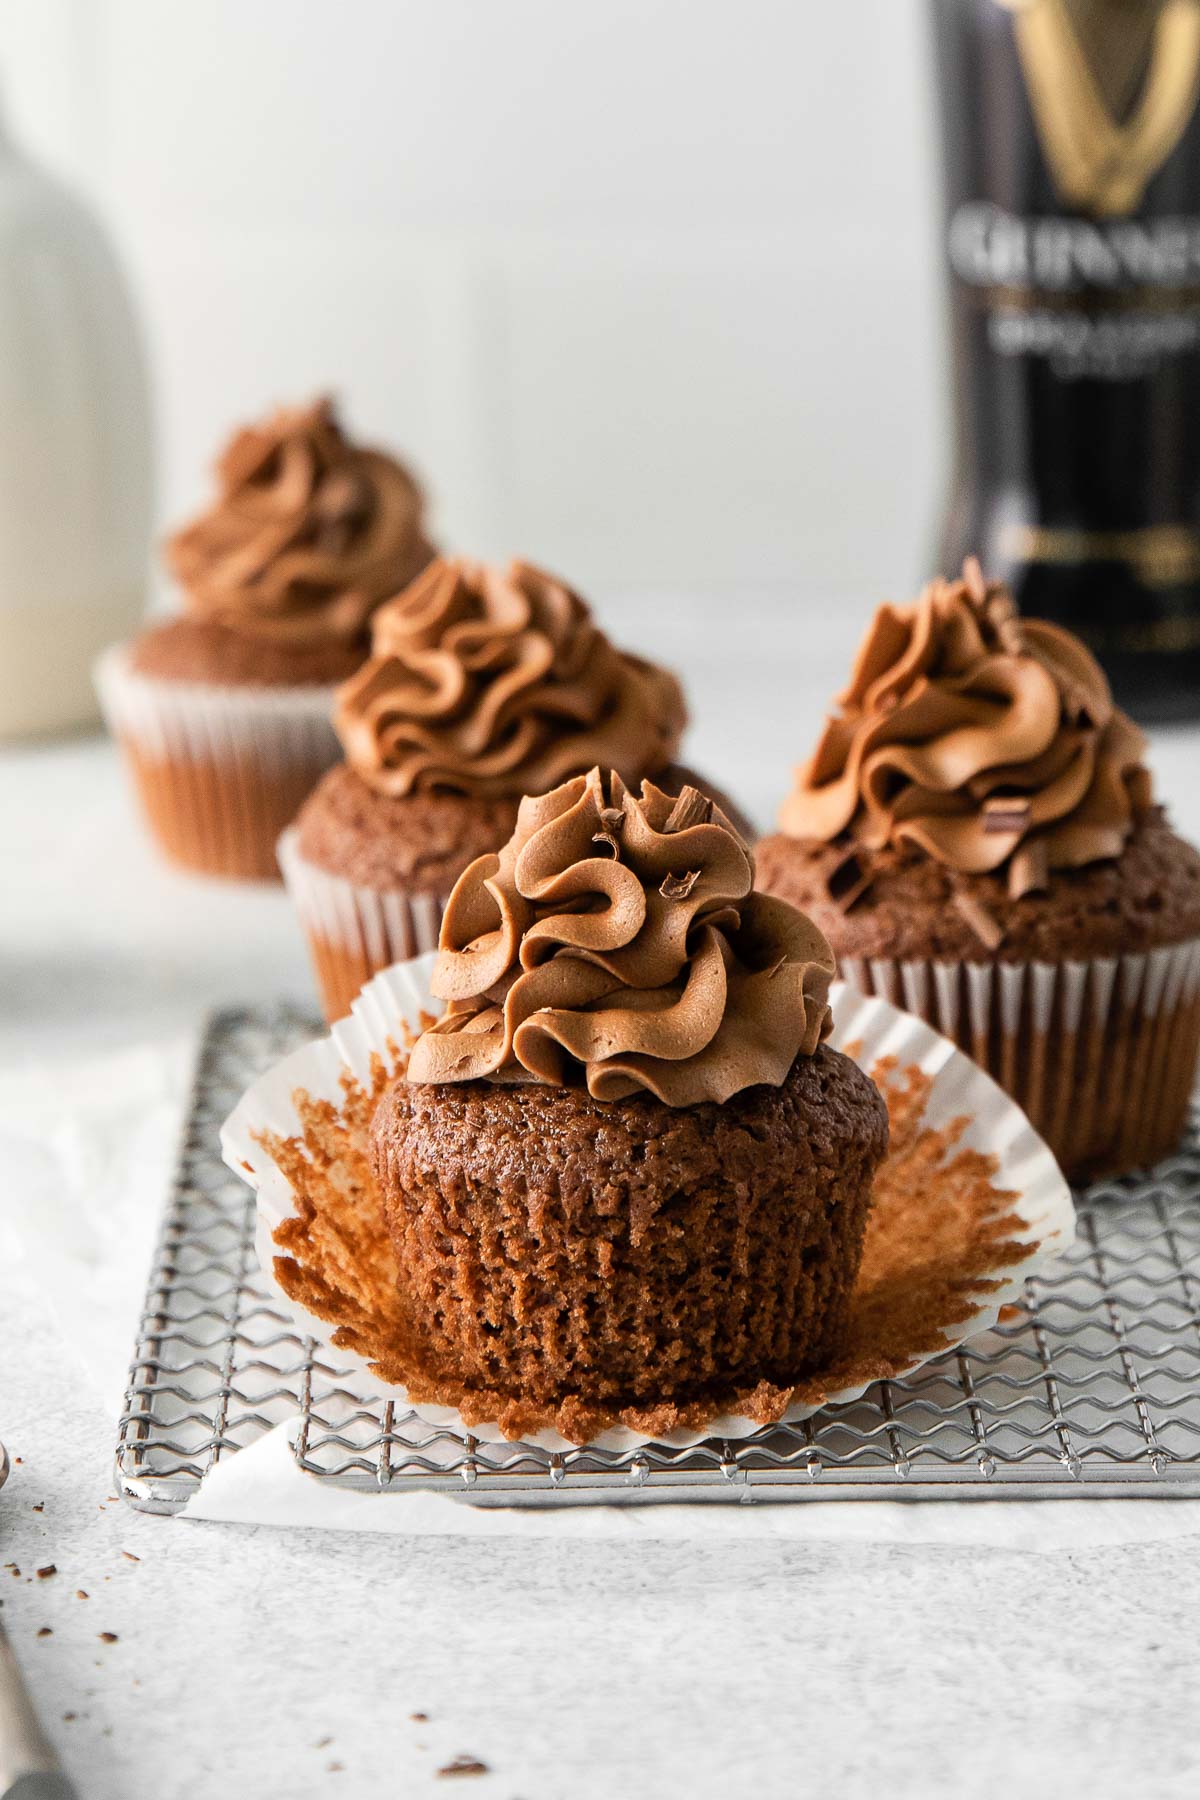 three guinness chocolate cupcakes with chocolate frosting on a wire rack with the white liner pulled back